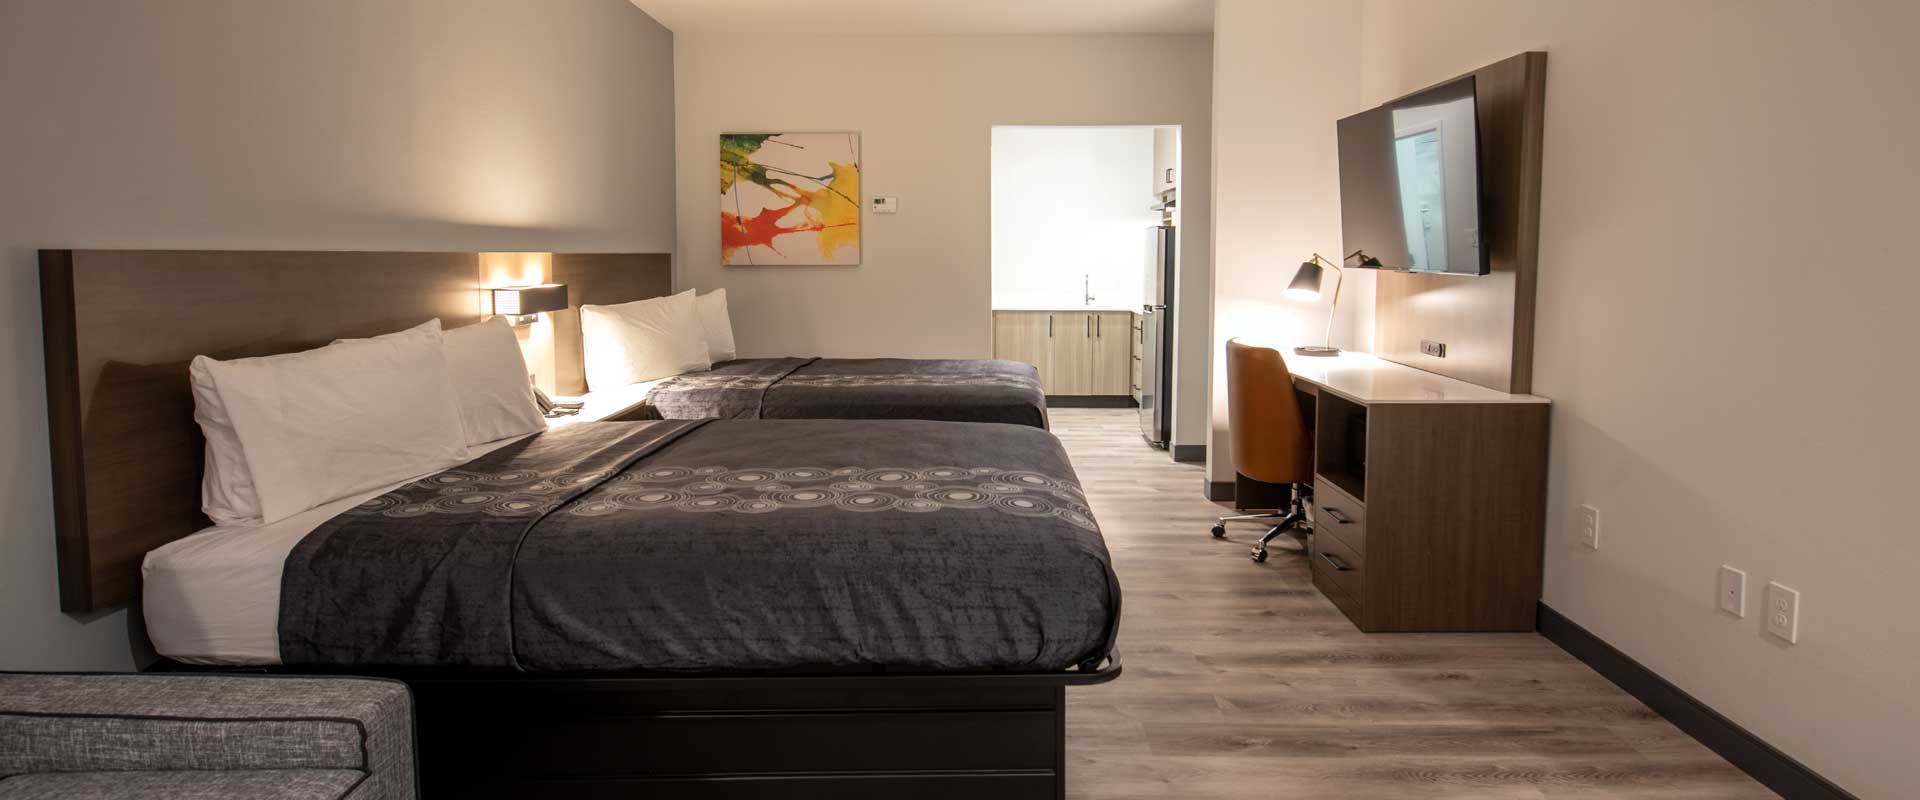 Express Inn & Suites | Houston Reasonable Rates Newly Remodeled